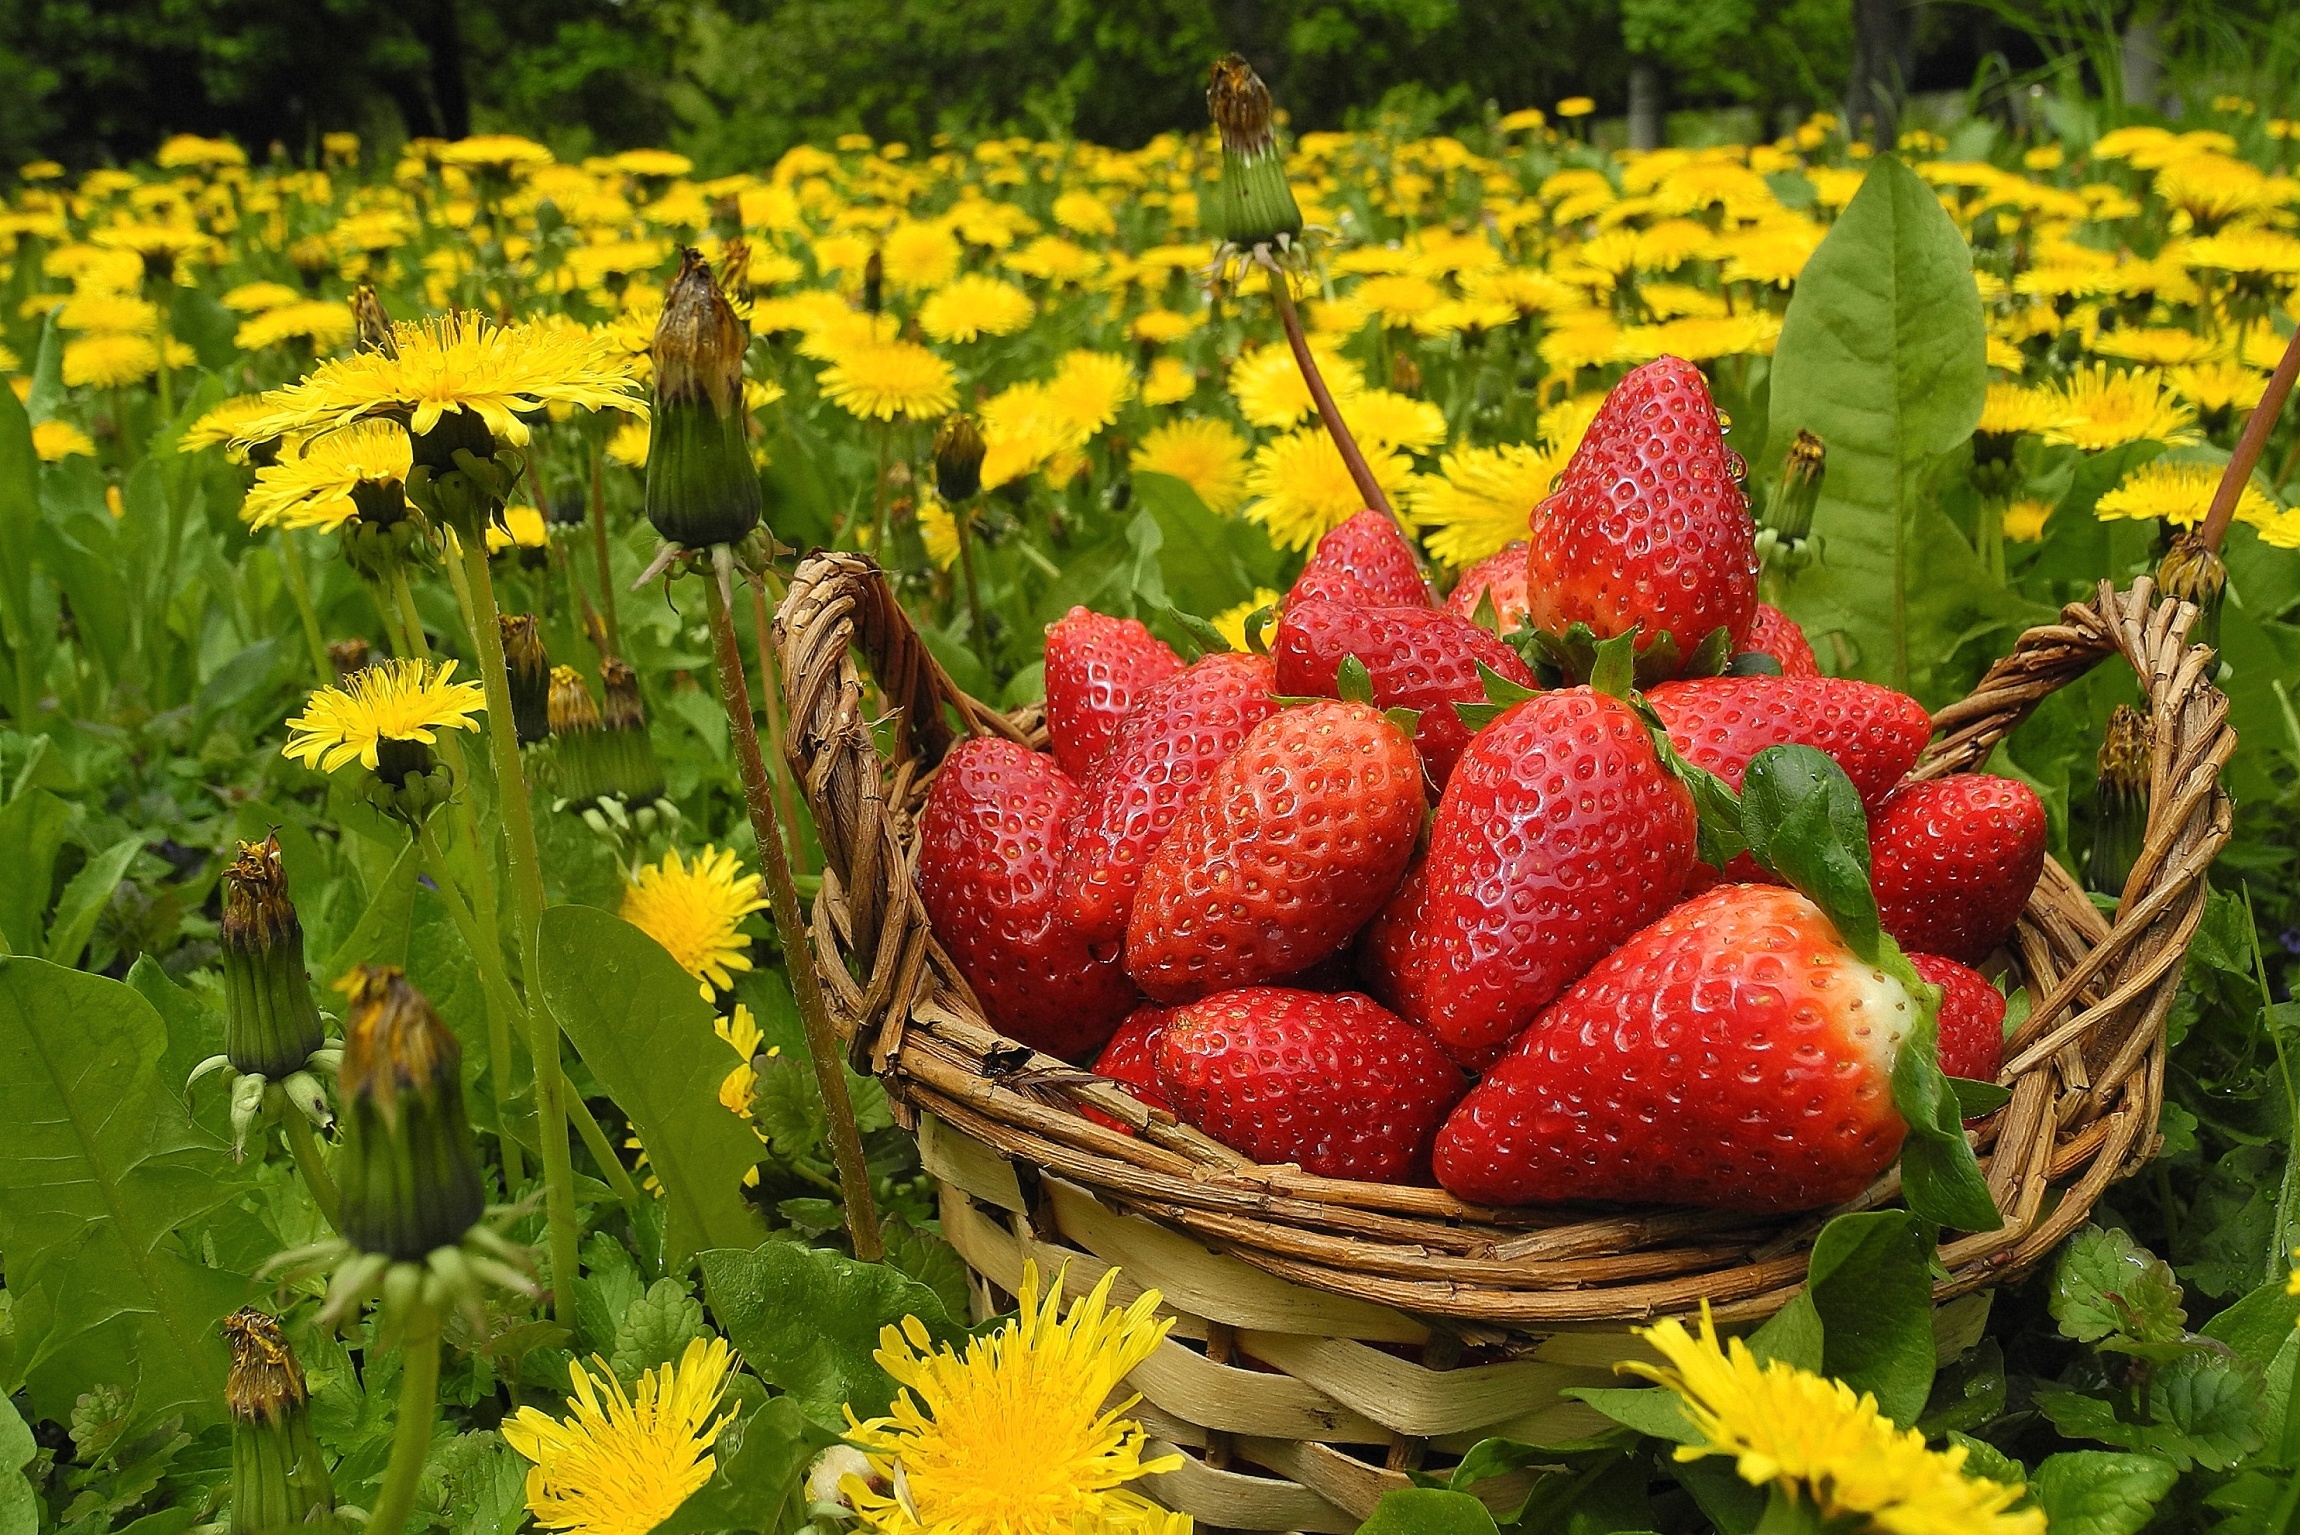 meadow, berries, flowers, strawberry HD Wallpaper for Phone